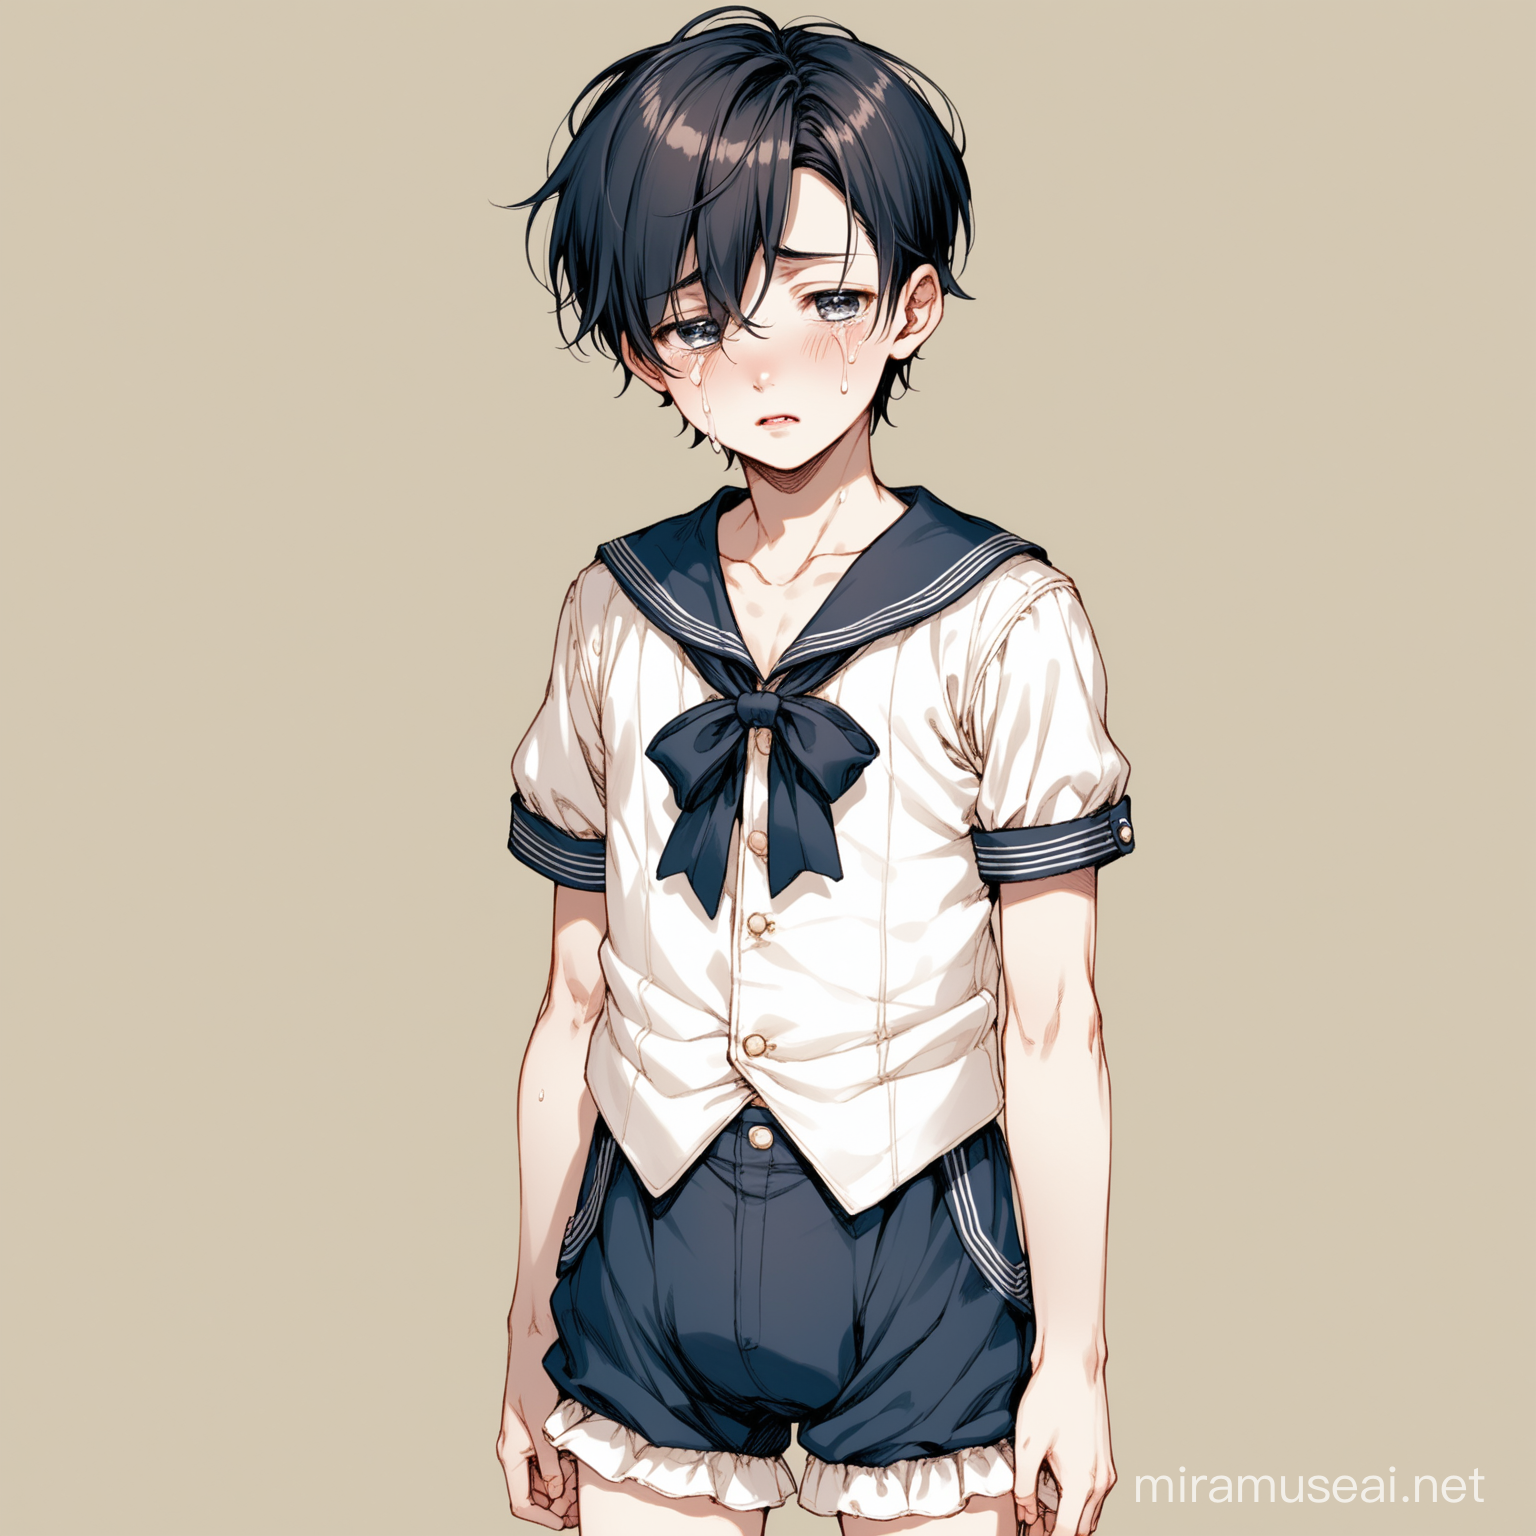 A very beautiful boy, 15 years old, skinny, no muscles, short hair, white skin, crying after his mother forced him to wear baby clothes and diapers because he was naughty.  The boy now wears a childish, Victorian-era-looking sailor suit and short pants With diapers.